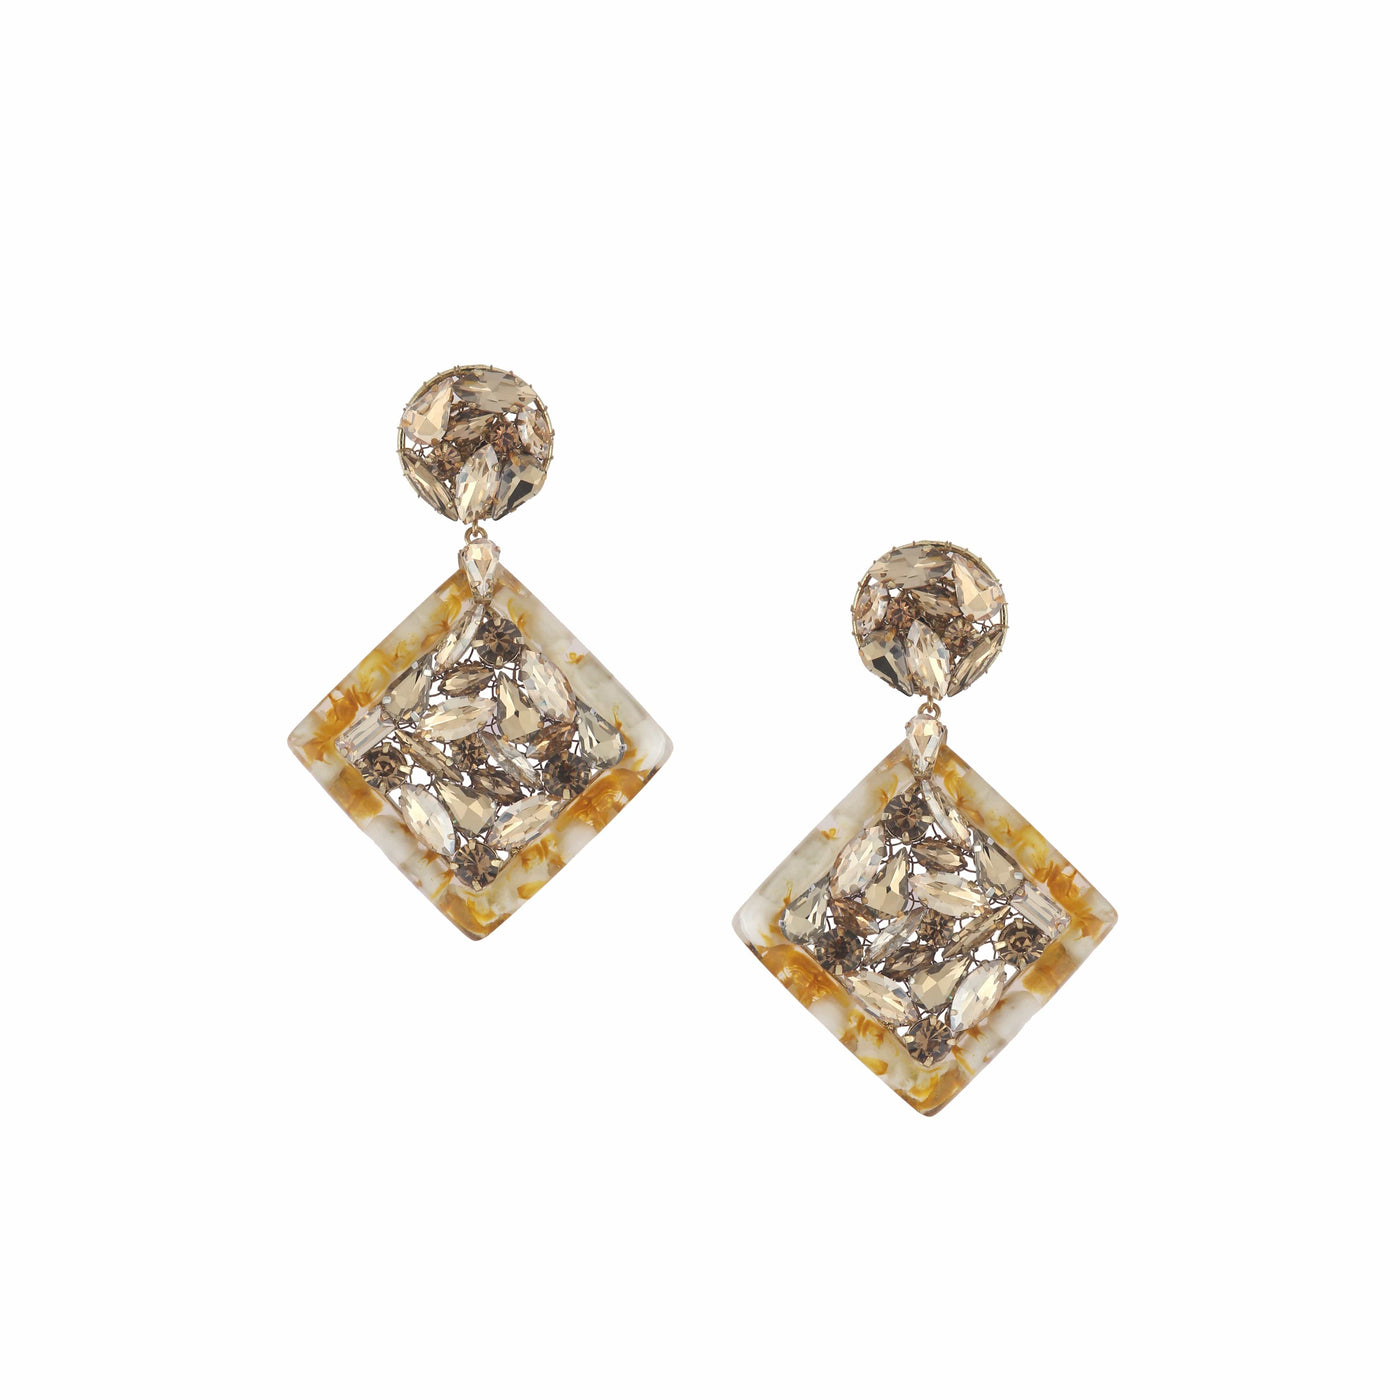 Gold Resin Square Earring With Crystal Stones